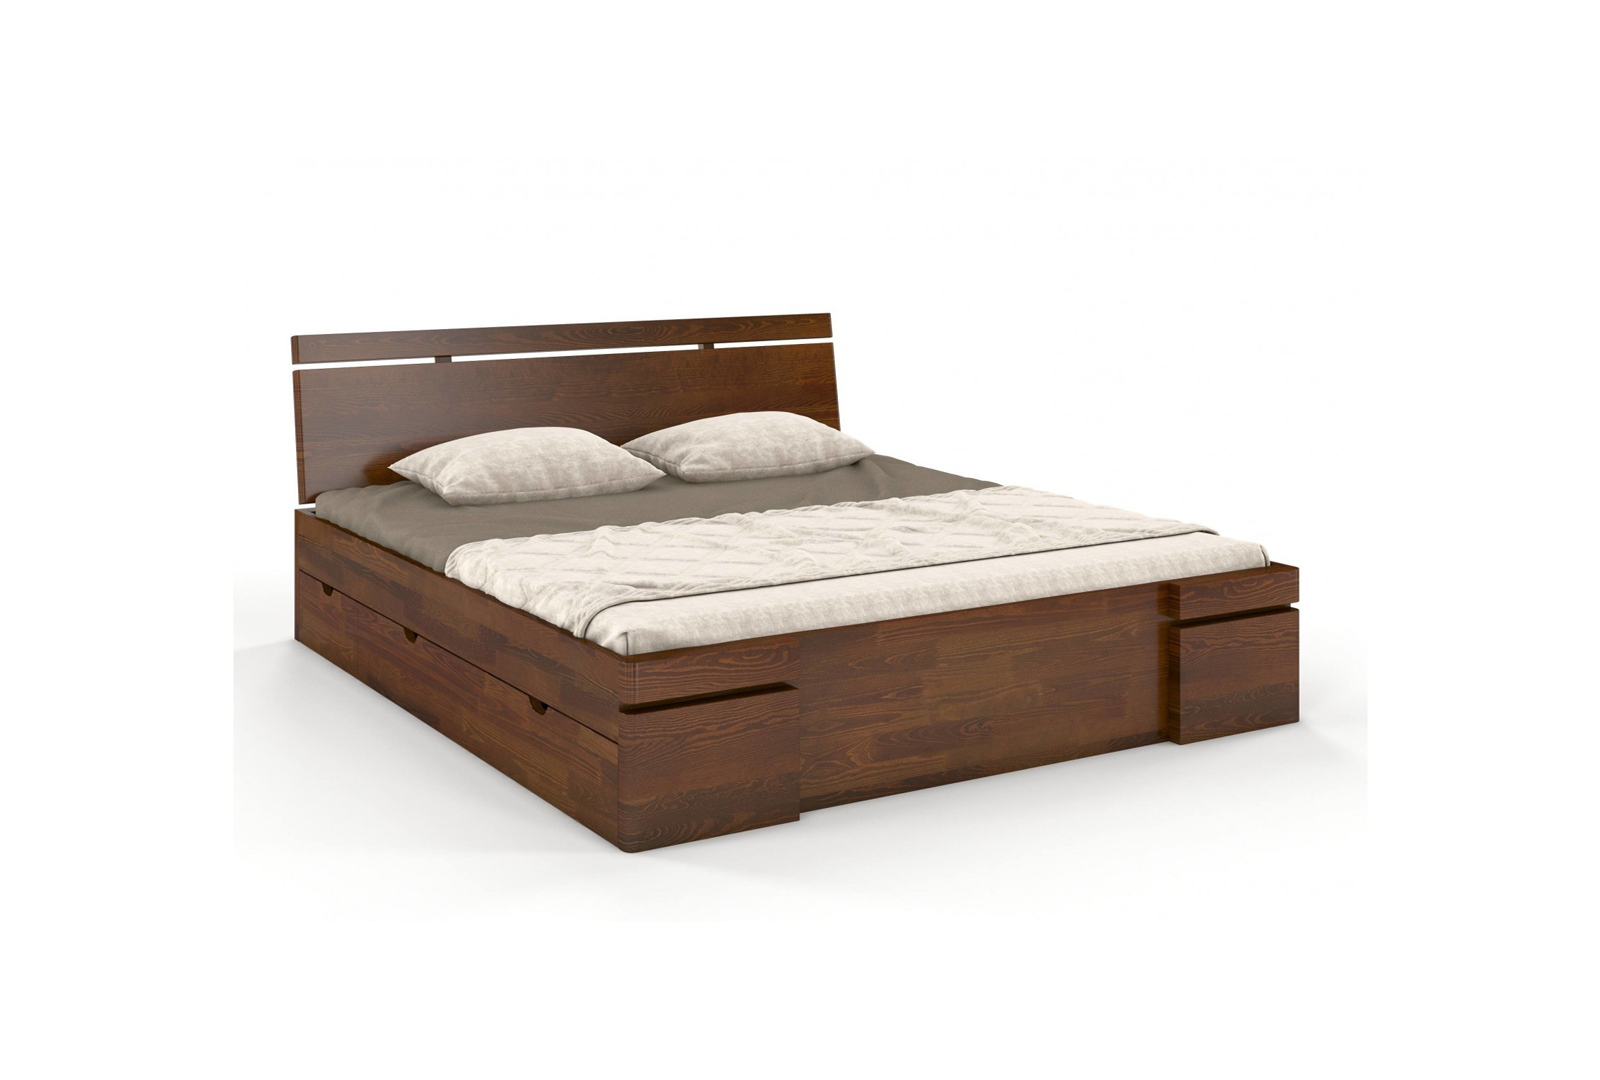 WOODEN PINE BED WITH DRAWERS SKANDICA SPARTA MAXI AND DR